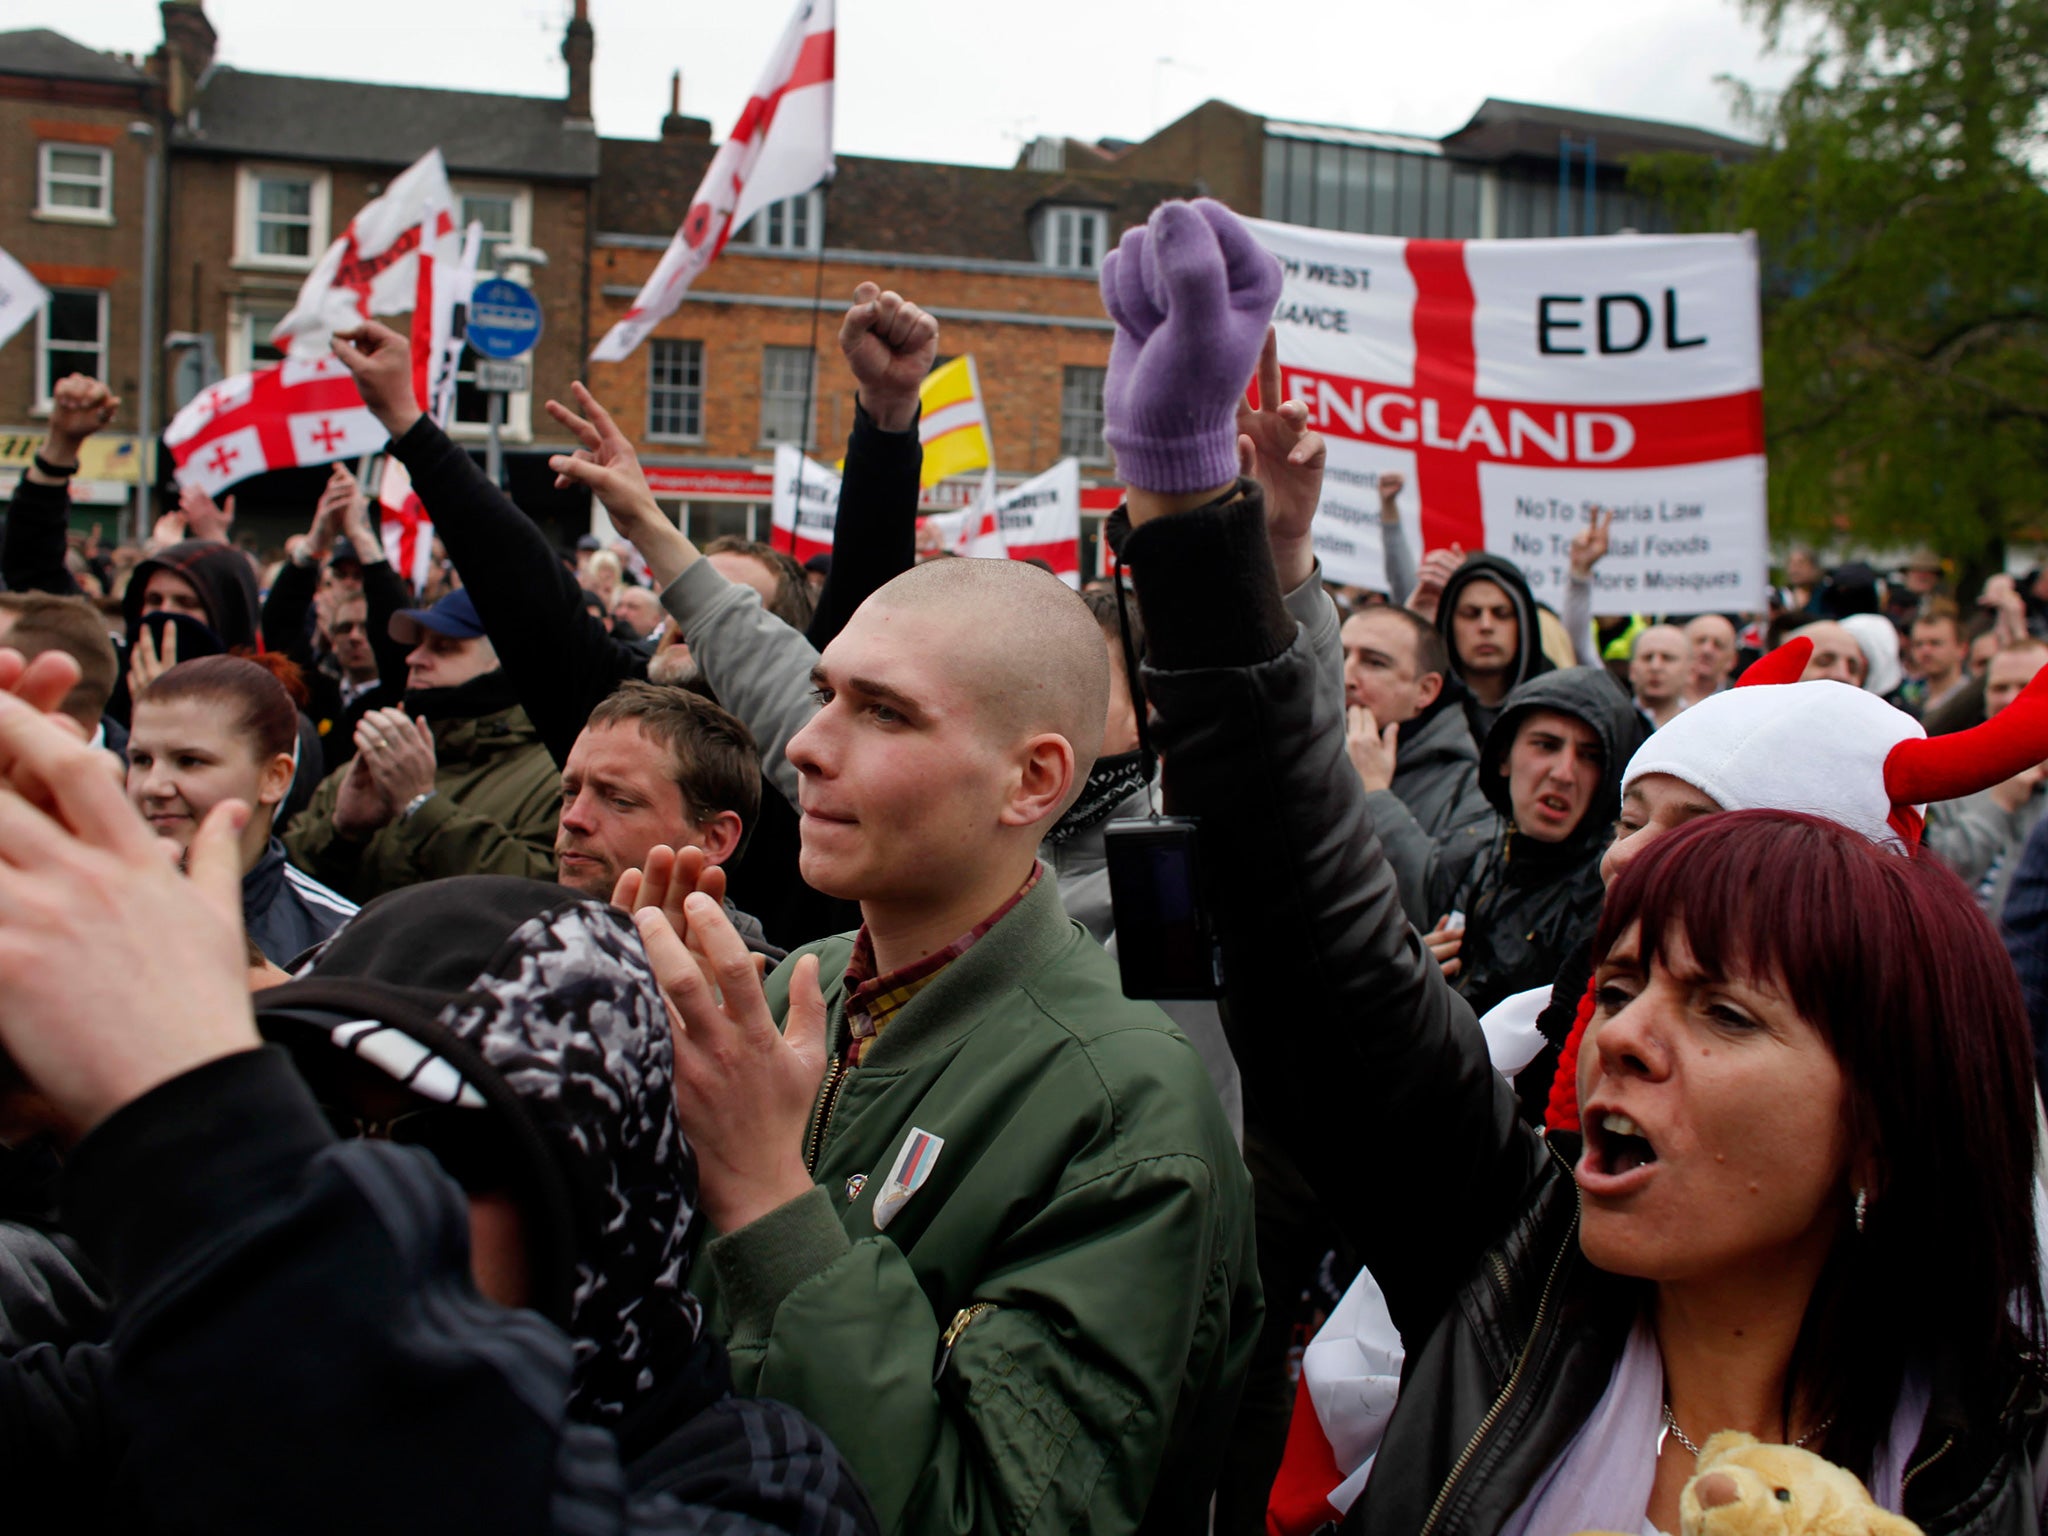 Members of the EDL protest in 2012